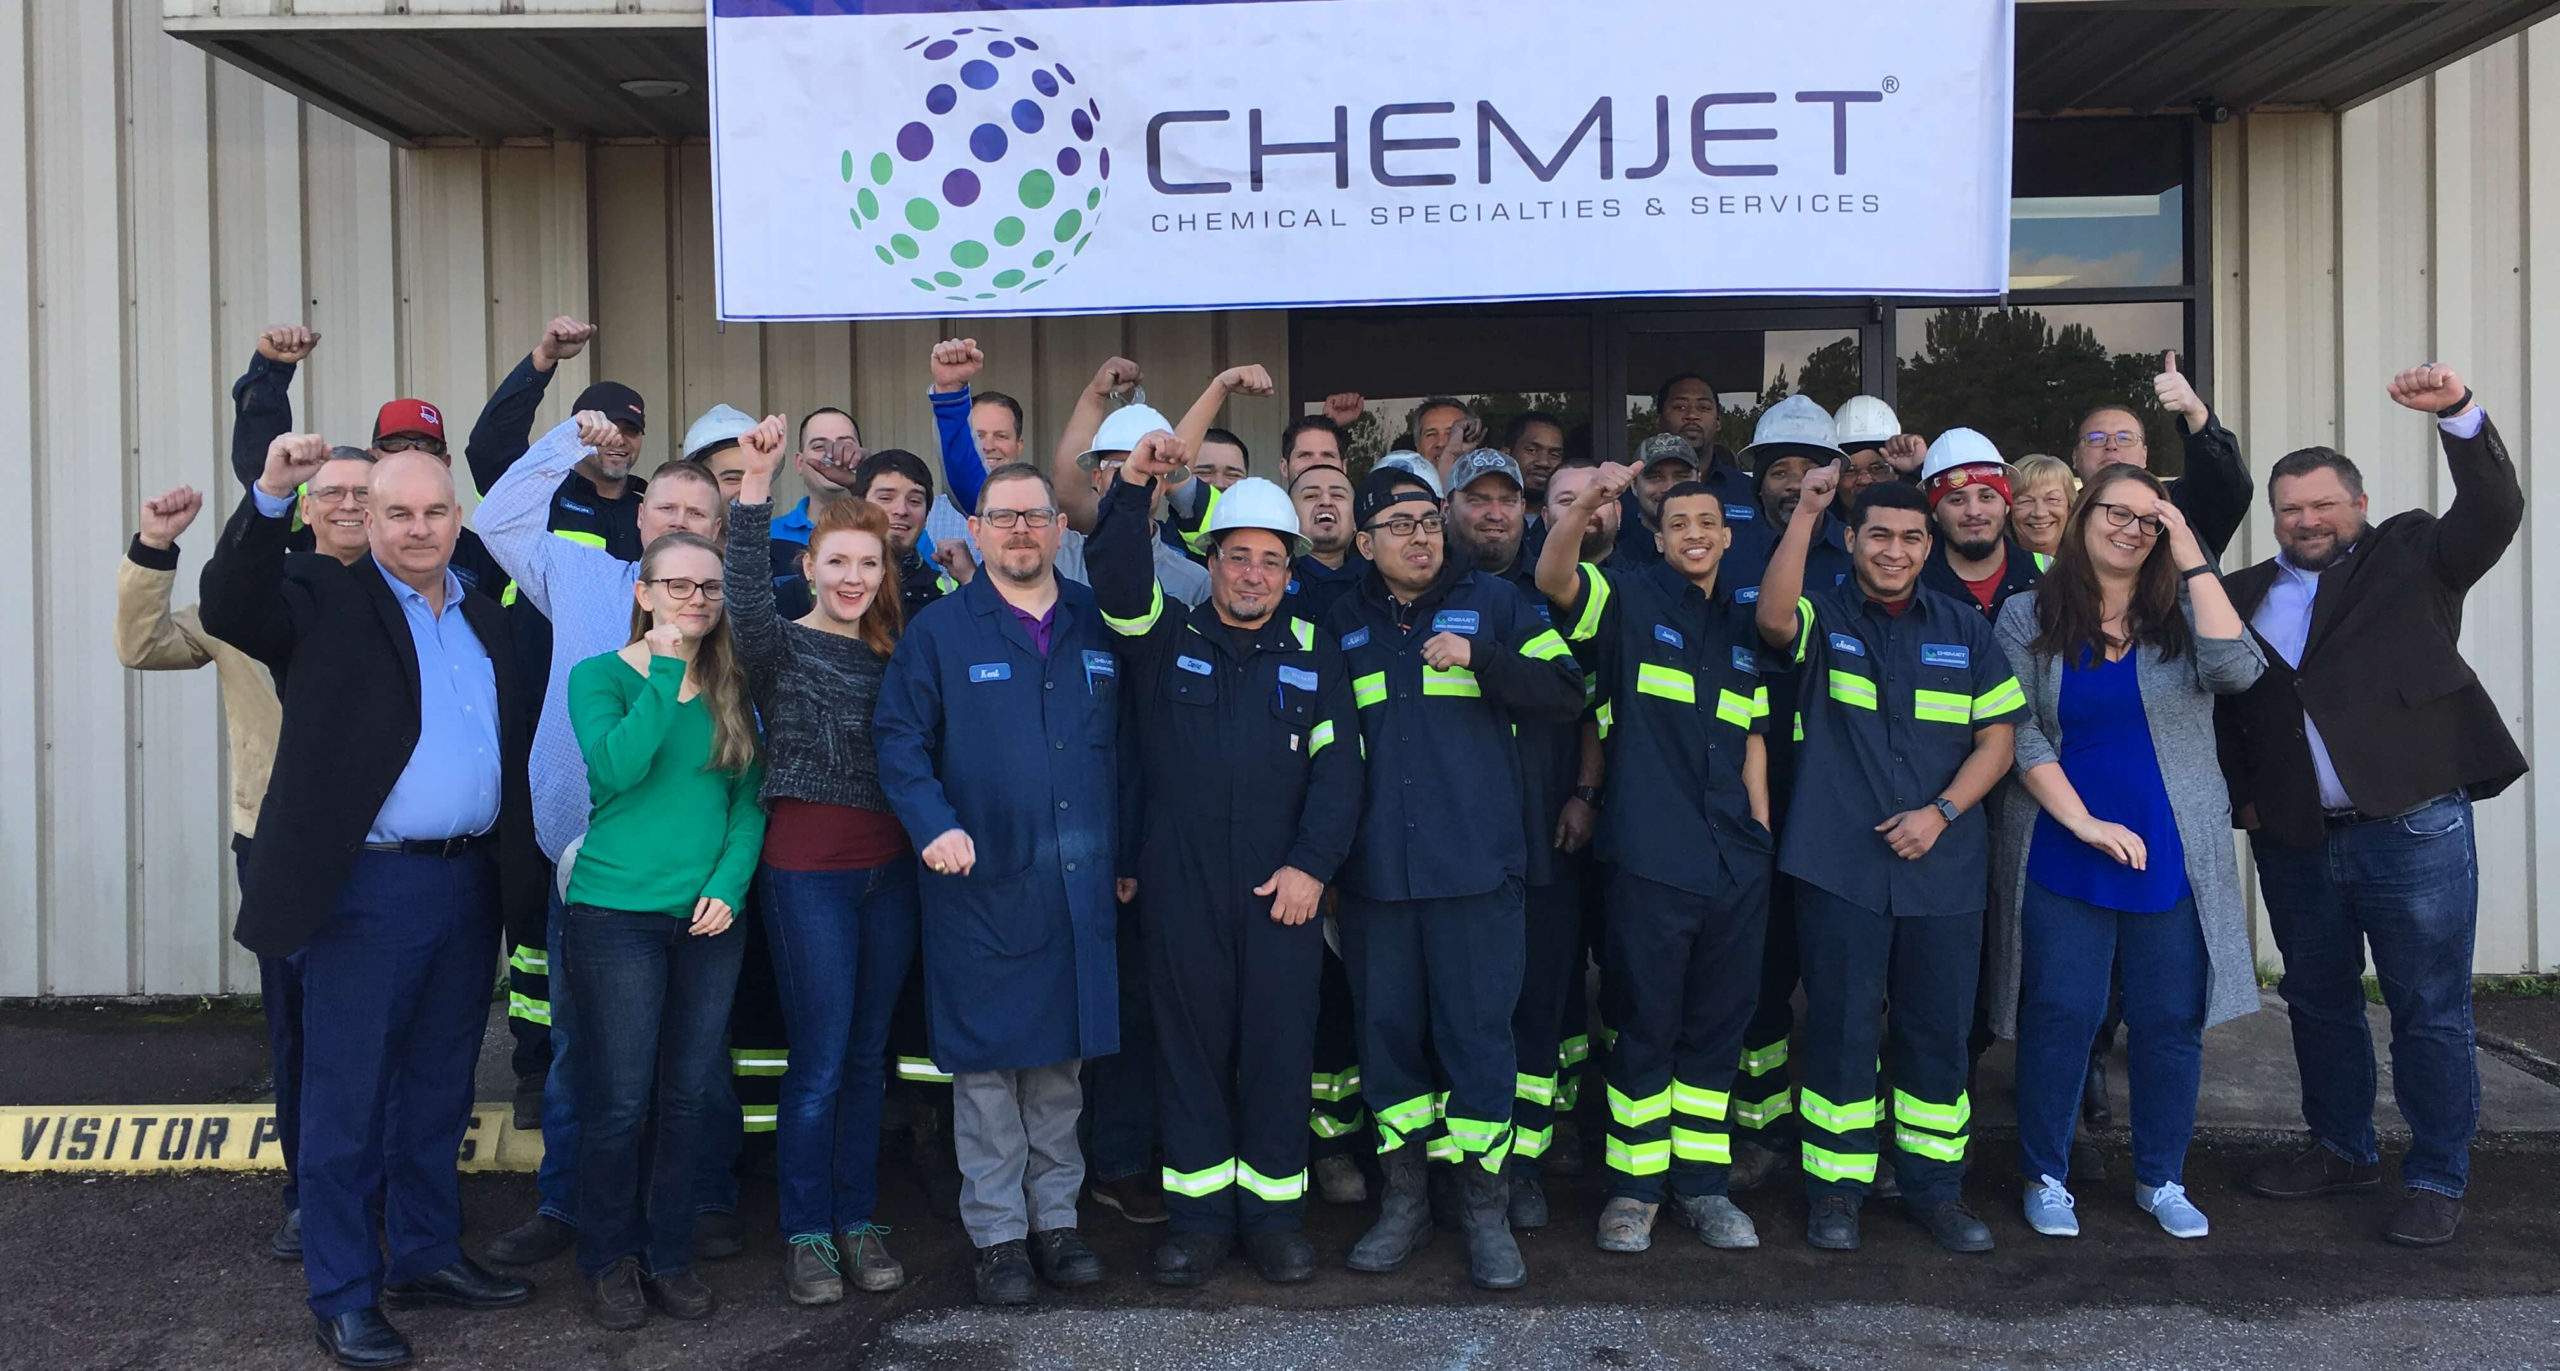 The Chemjet team at their Conroe plant